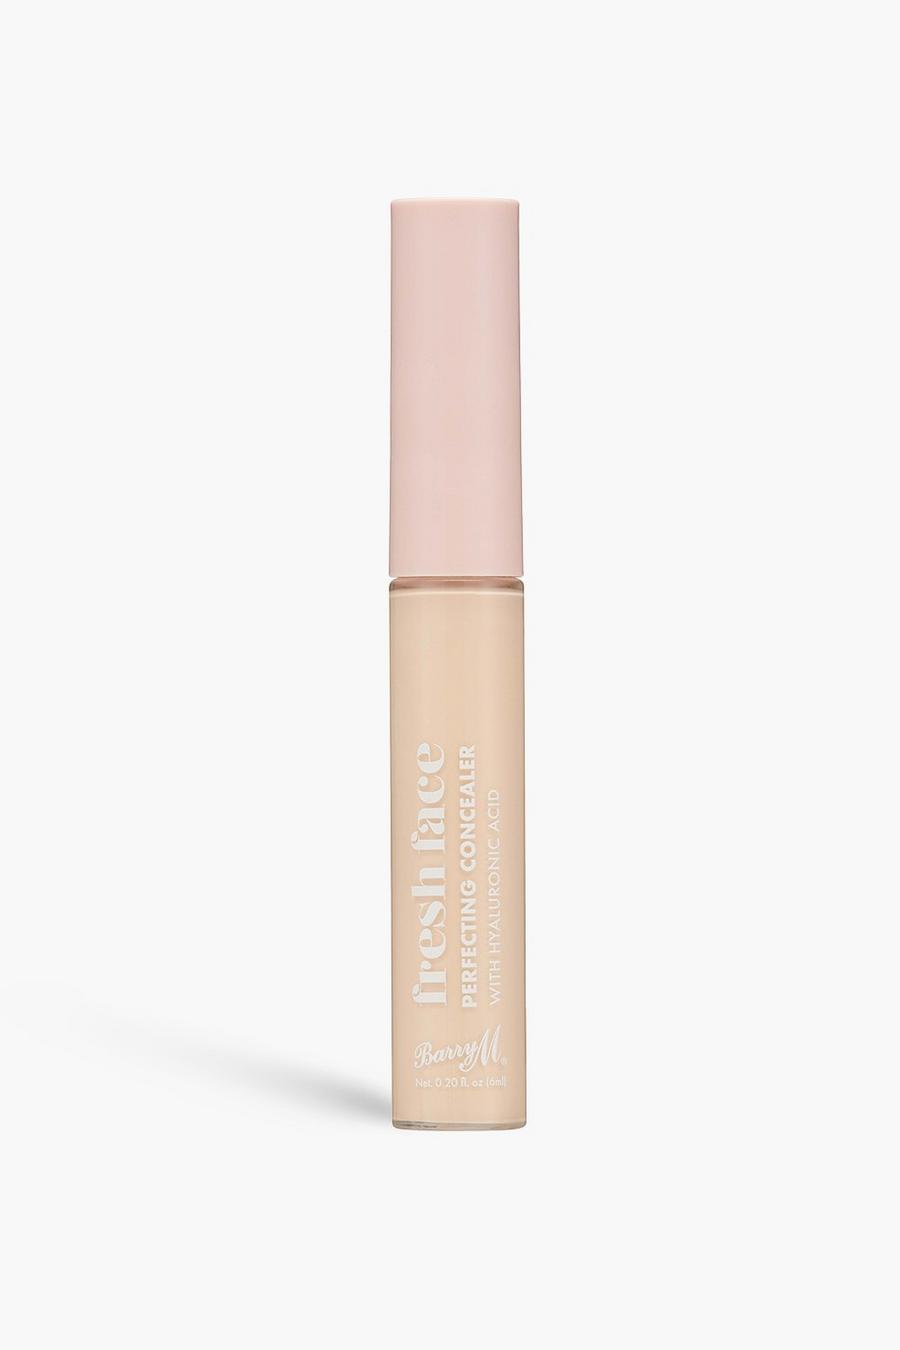 Barry M Fresh Face Perfecting Concealer 1, Cream white